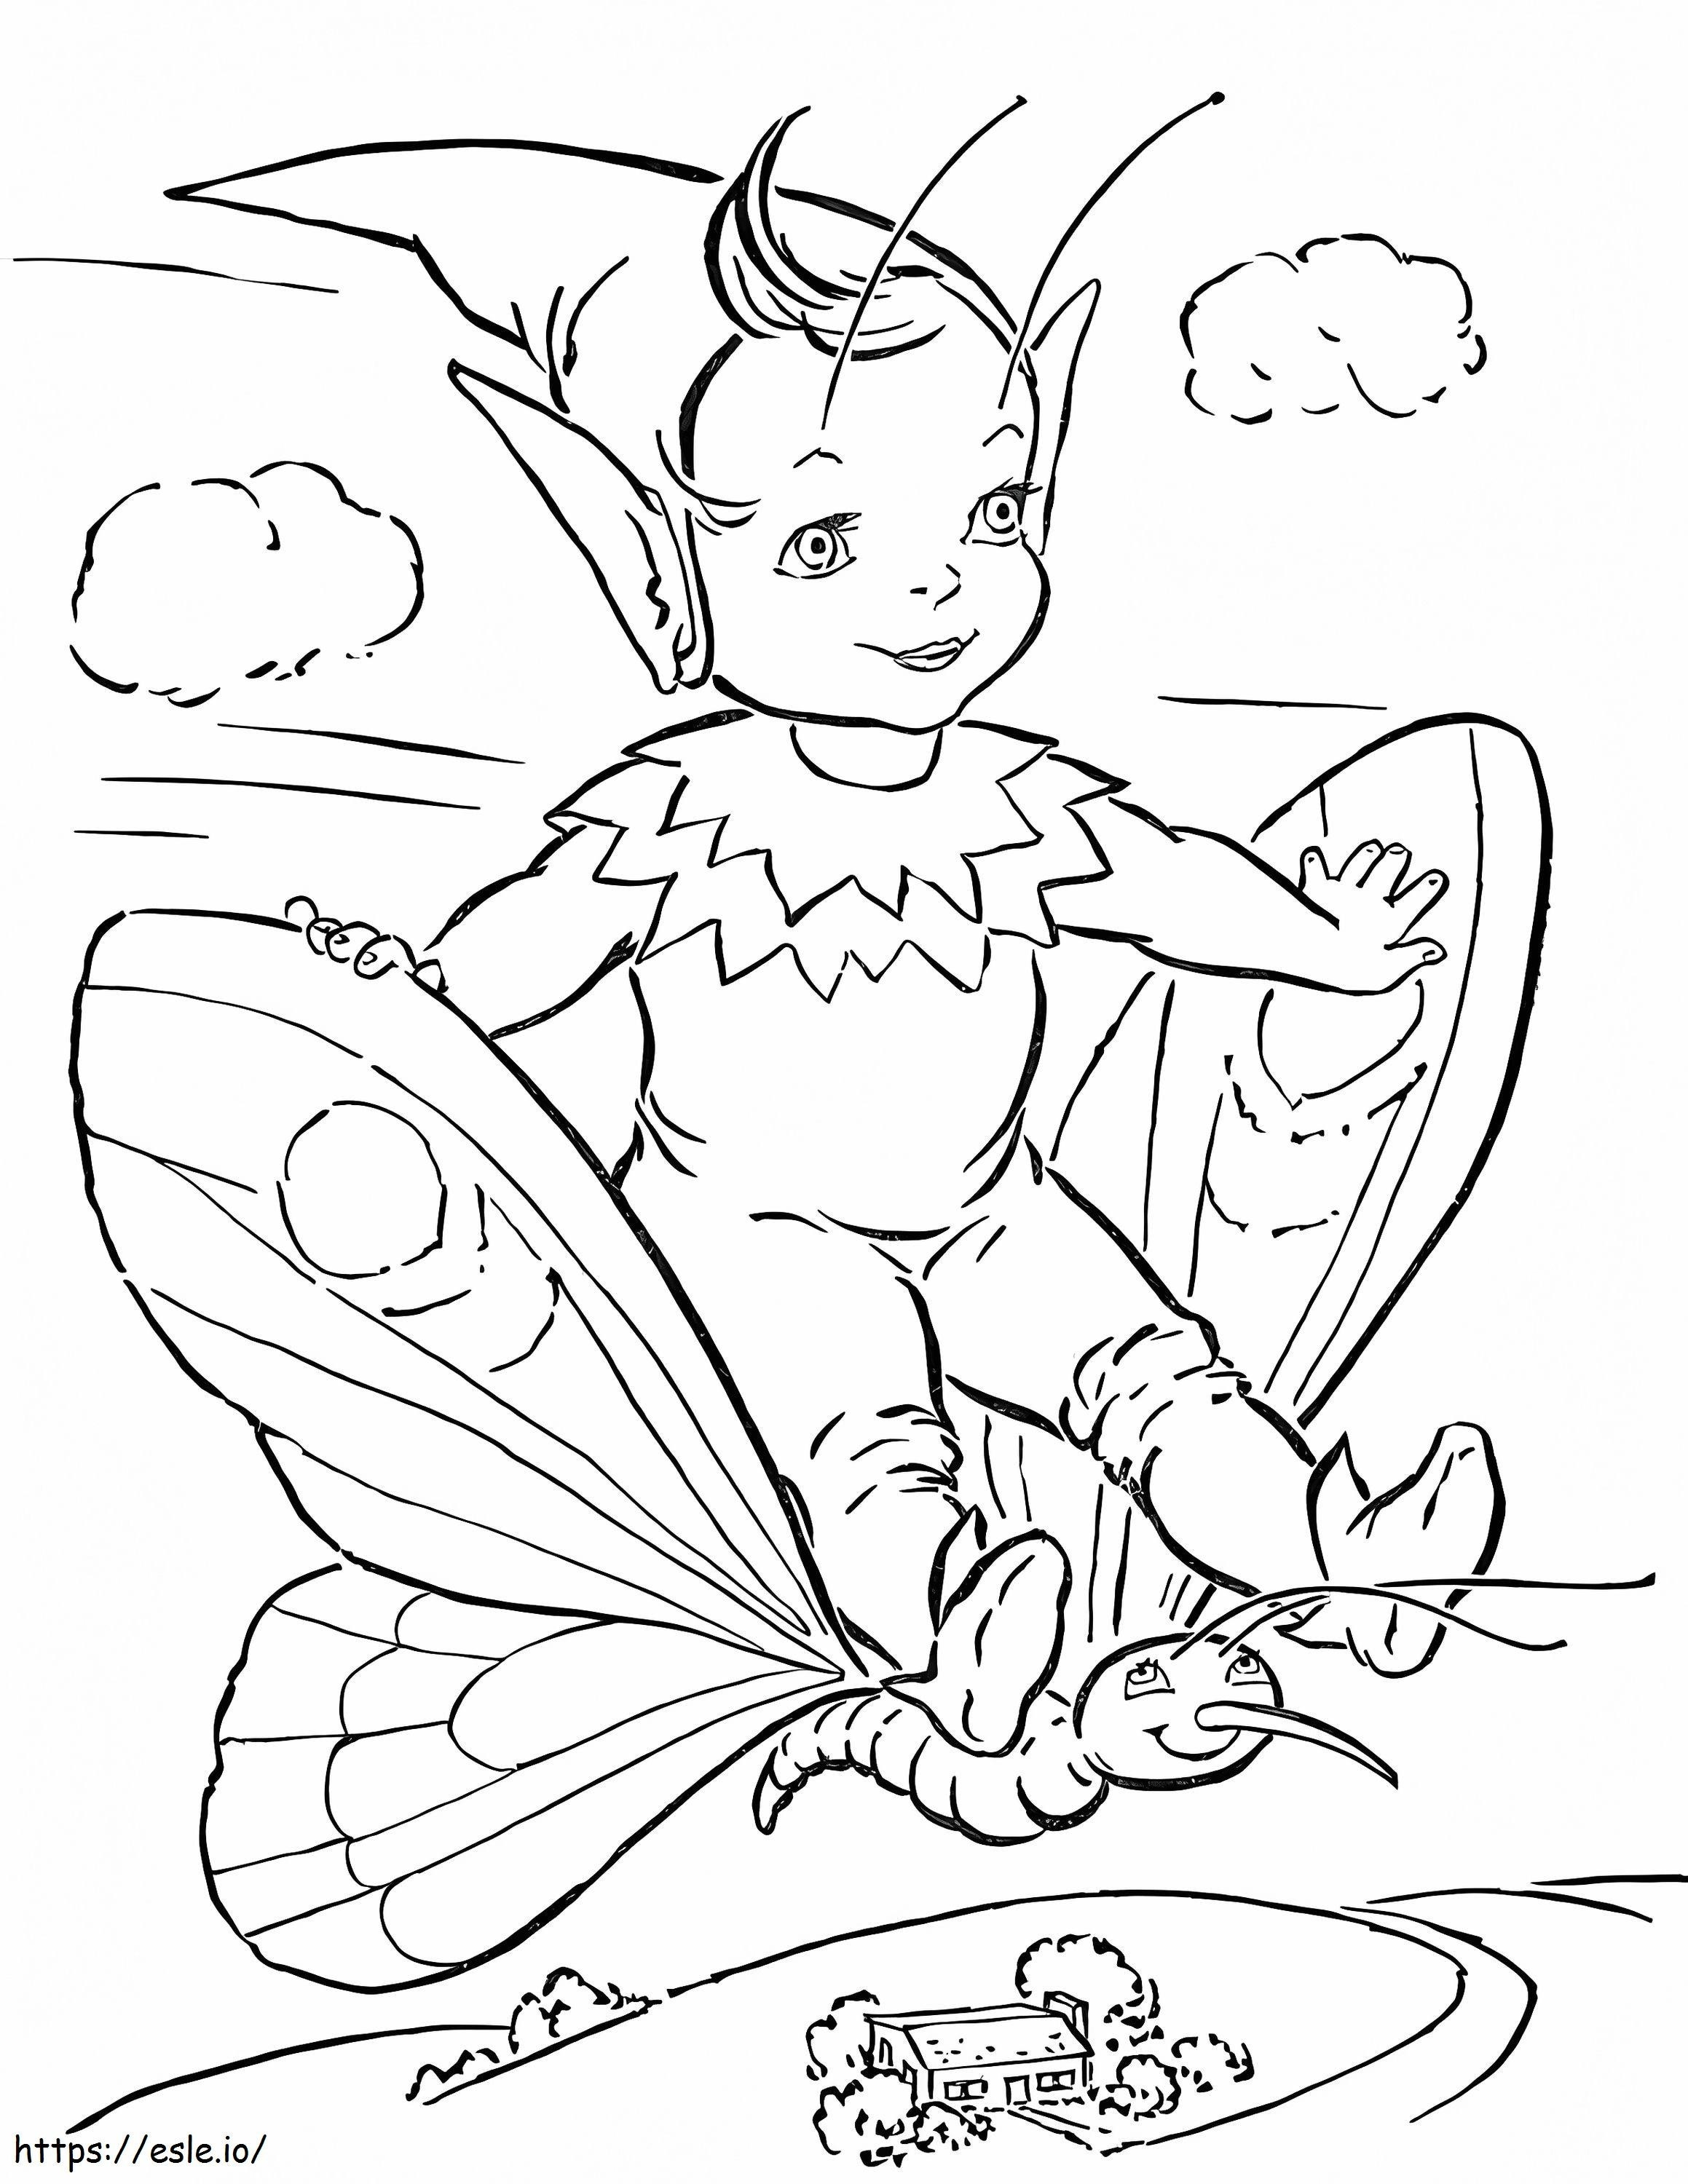 Fairy Riding Butterfly coloring page